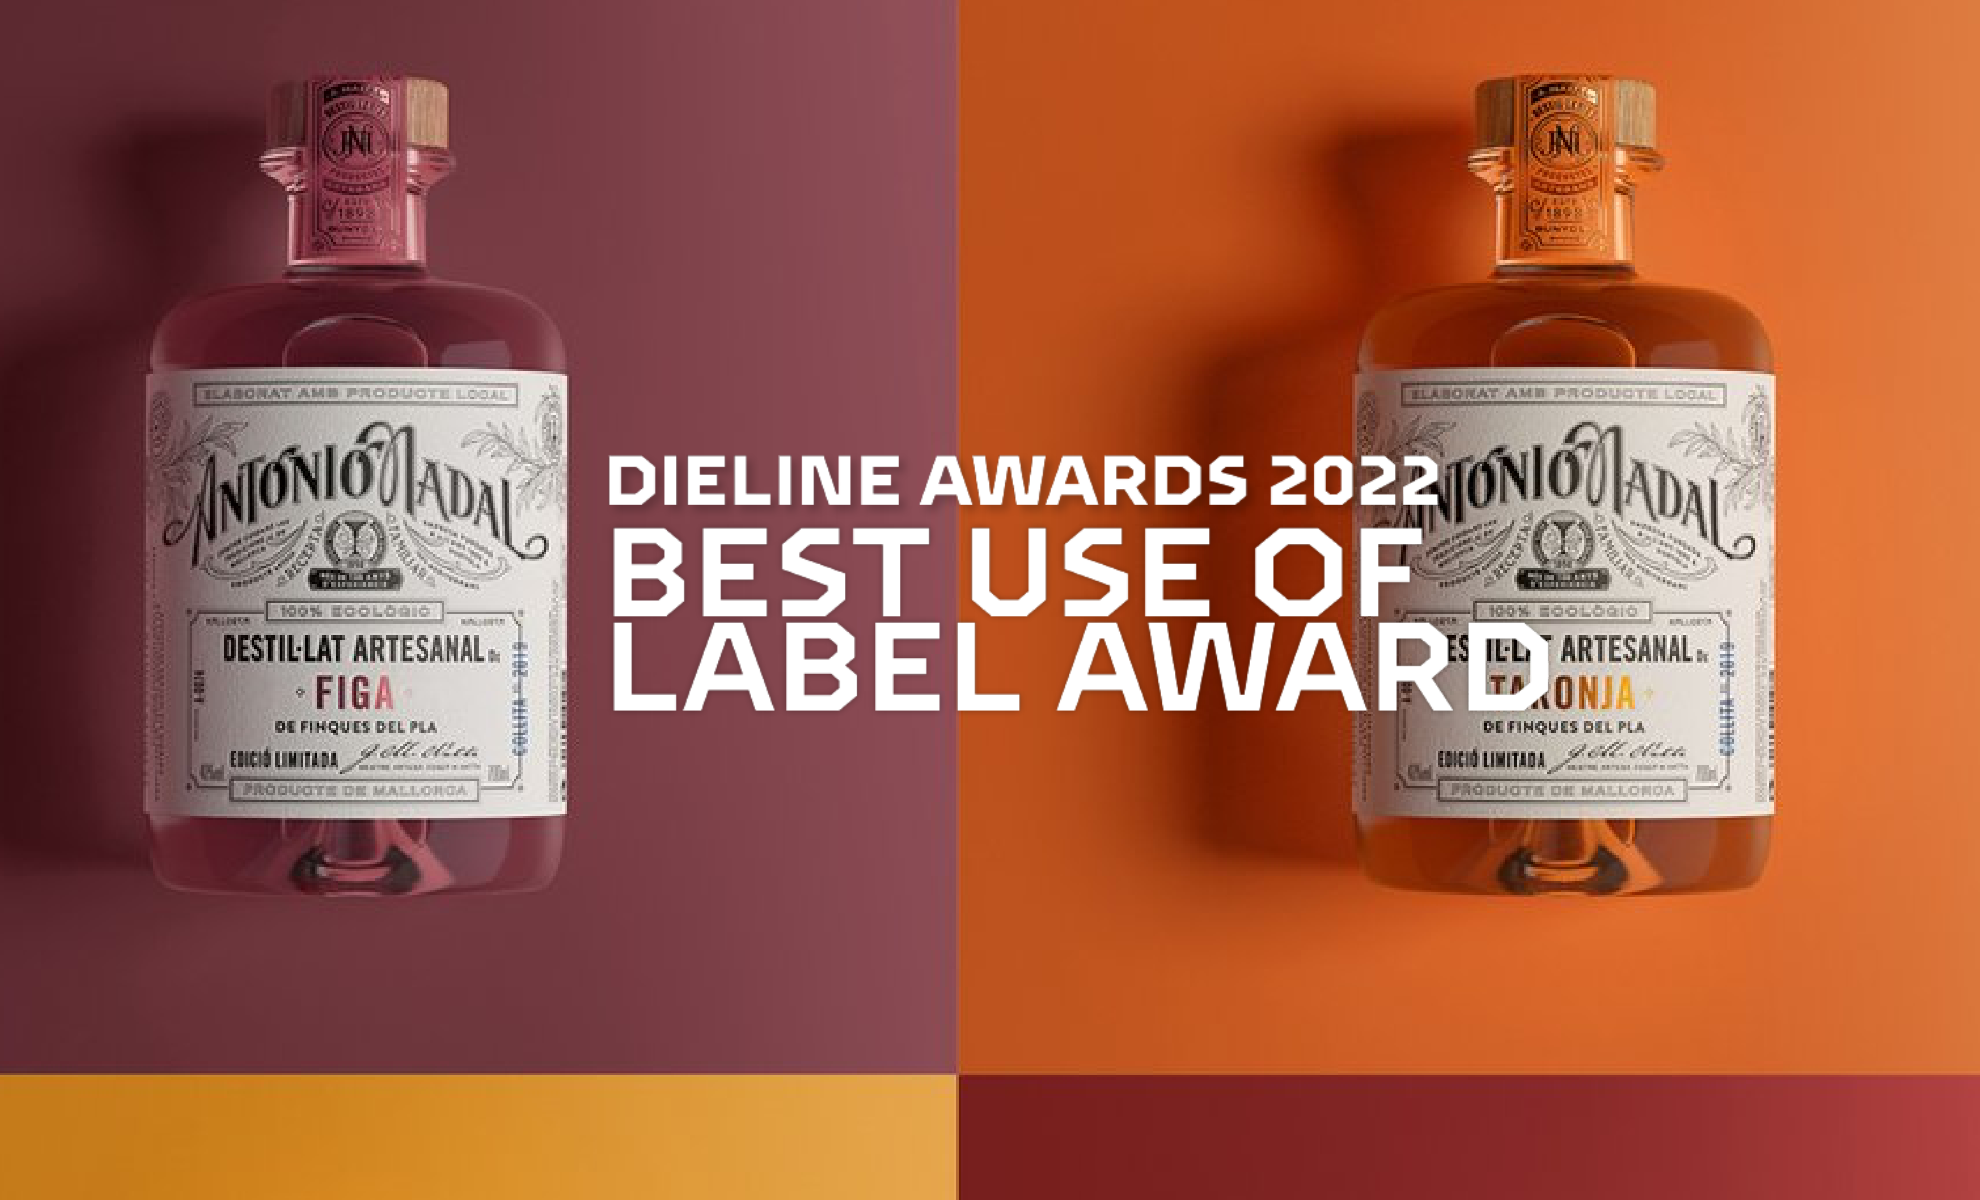 Best Use of Label Design Presented by: Fedrigoni Self-Adhesives